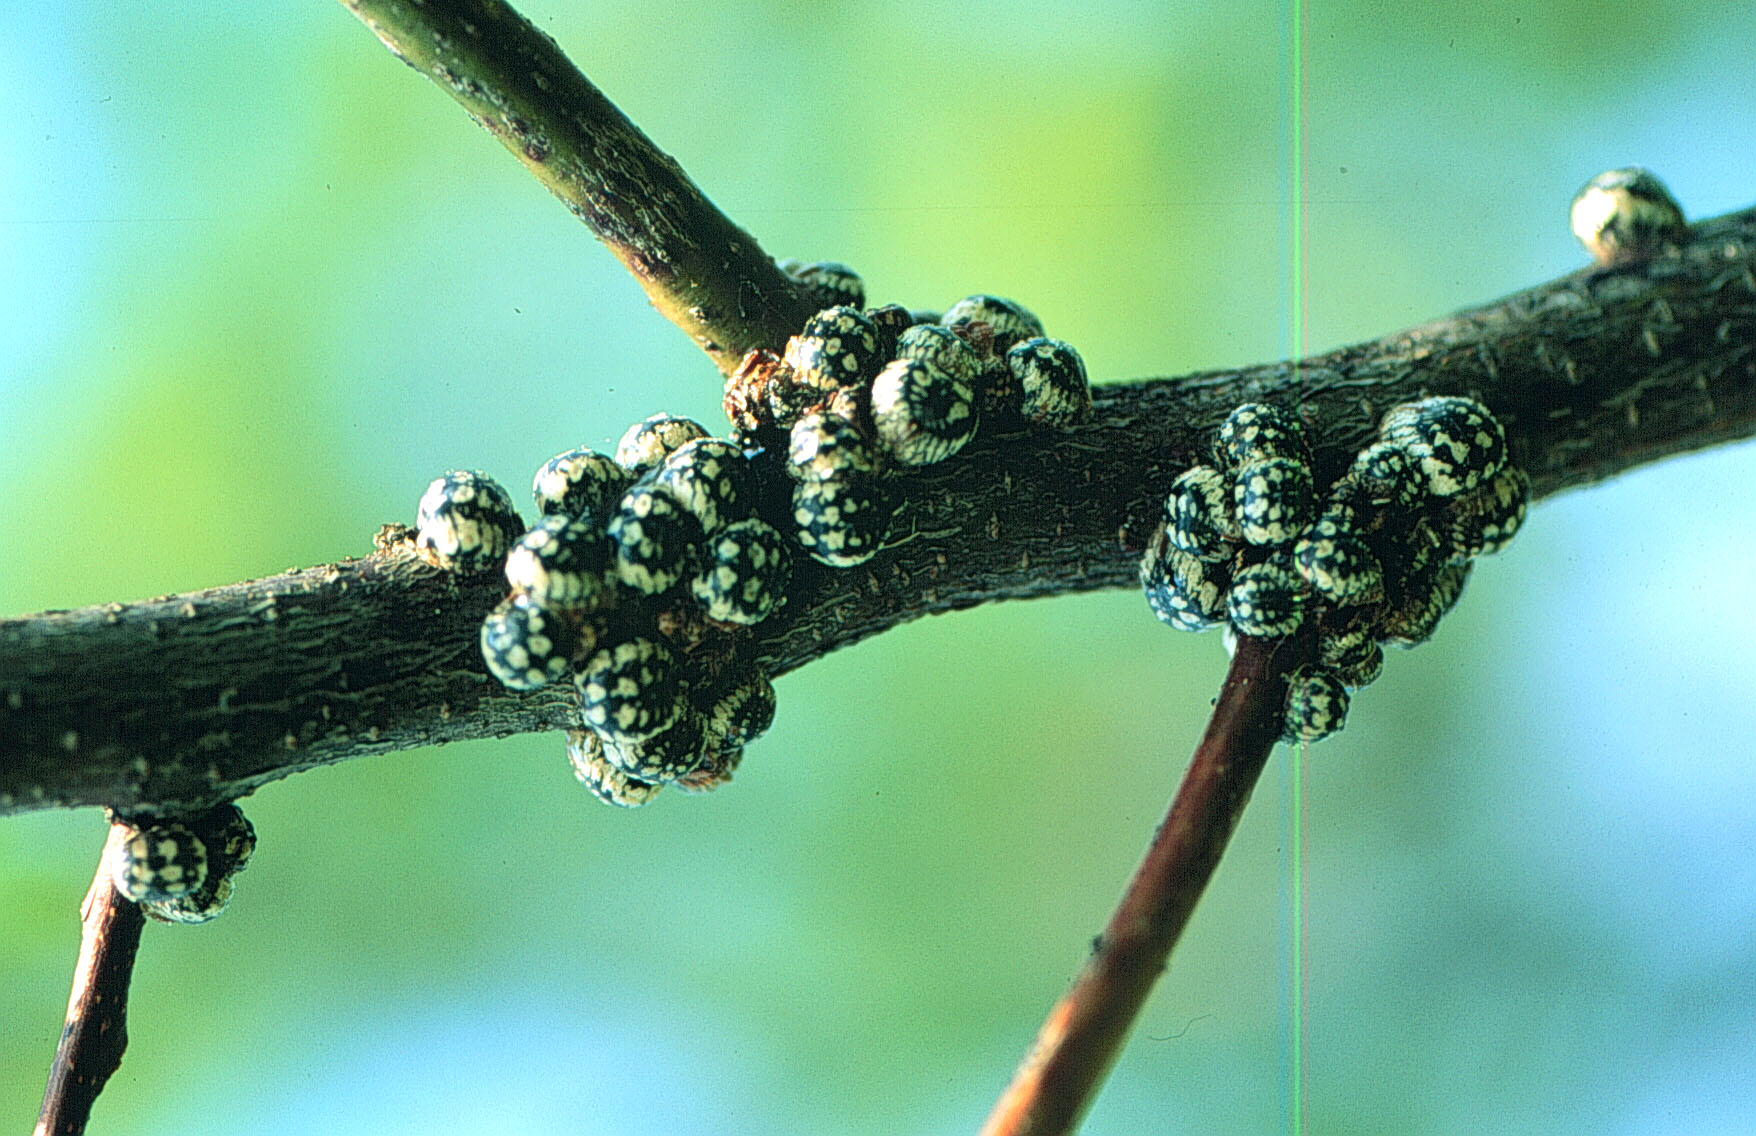 https://www.aces.edu/blog/topics/lawn-garden/controlling-scale-insects-and-mealybugs/calico-scale-4edit/